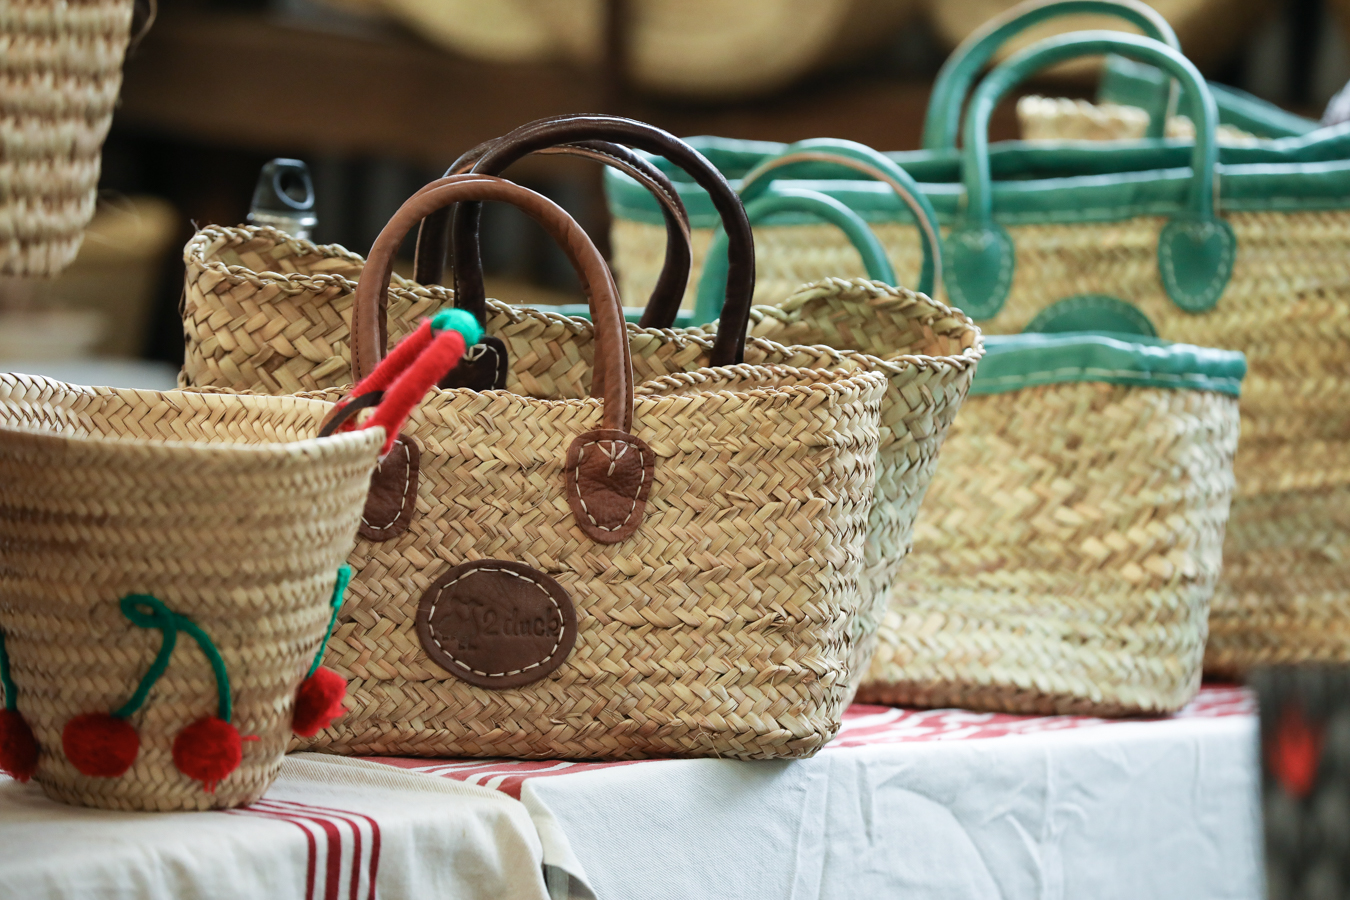 2 Duck Trading Co baskets